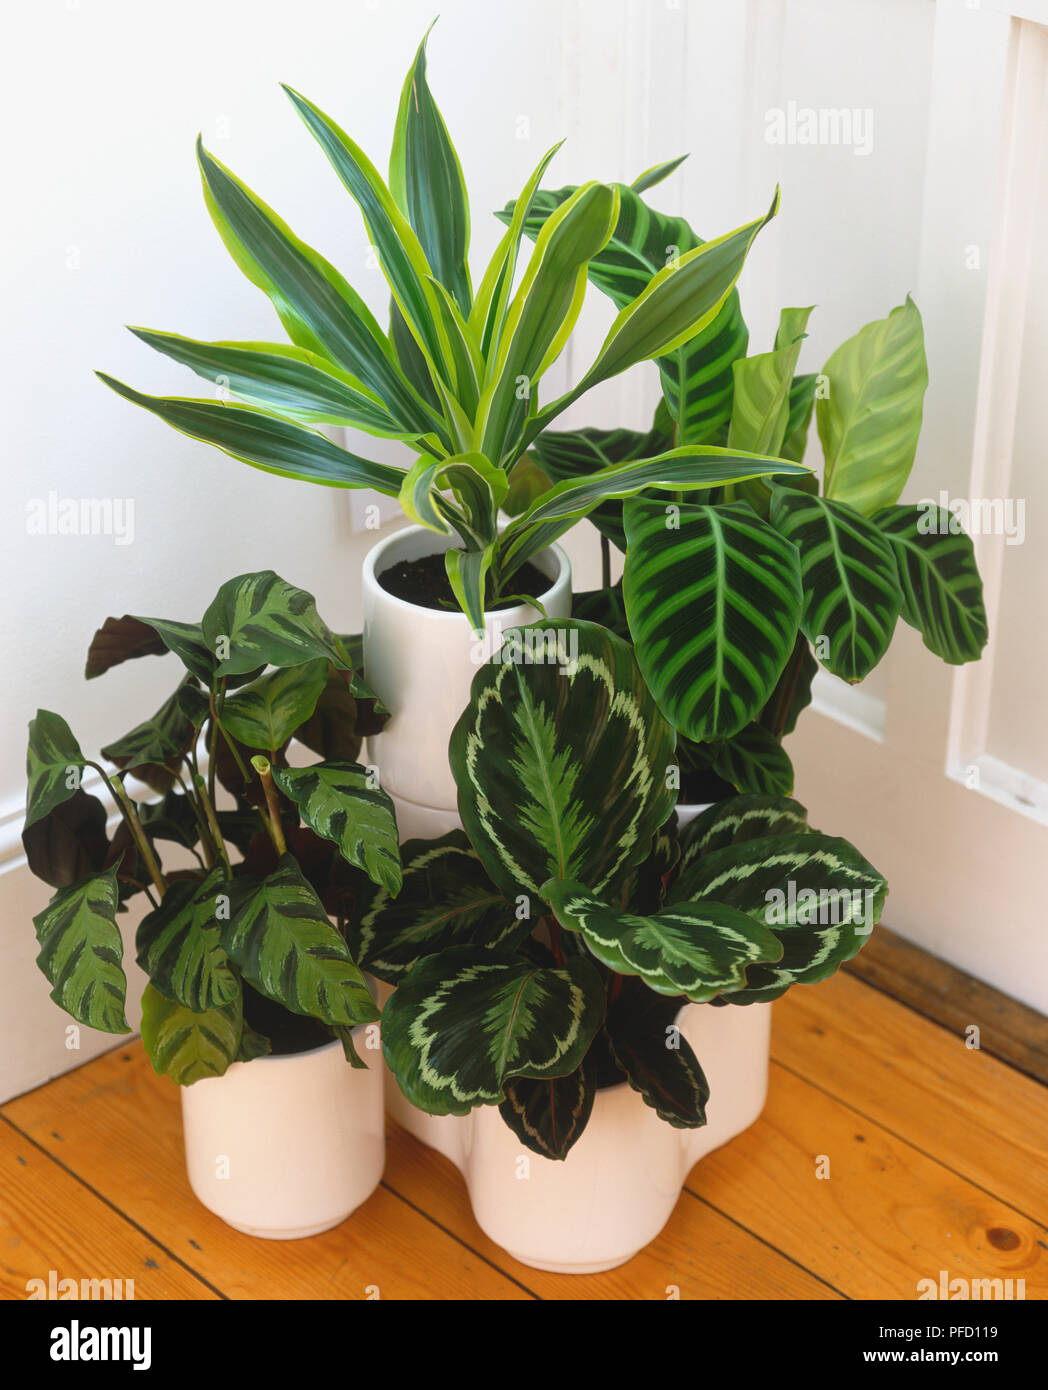 Selection of potted leafy green plants in room corner display, including Calathea makoyana, Peacock Plant and Dracaena marginata, Madagascar Dragon Tree or Red Edged Dracaena, elevated view. Stock Photo